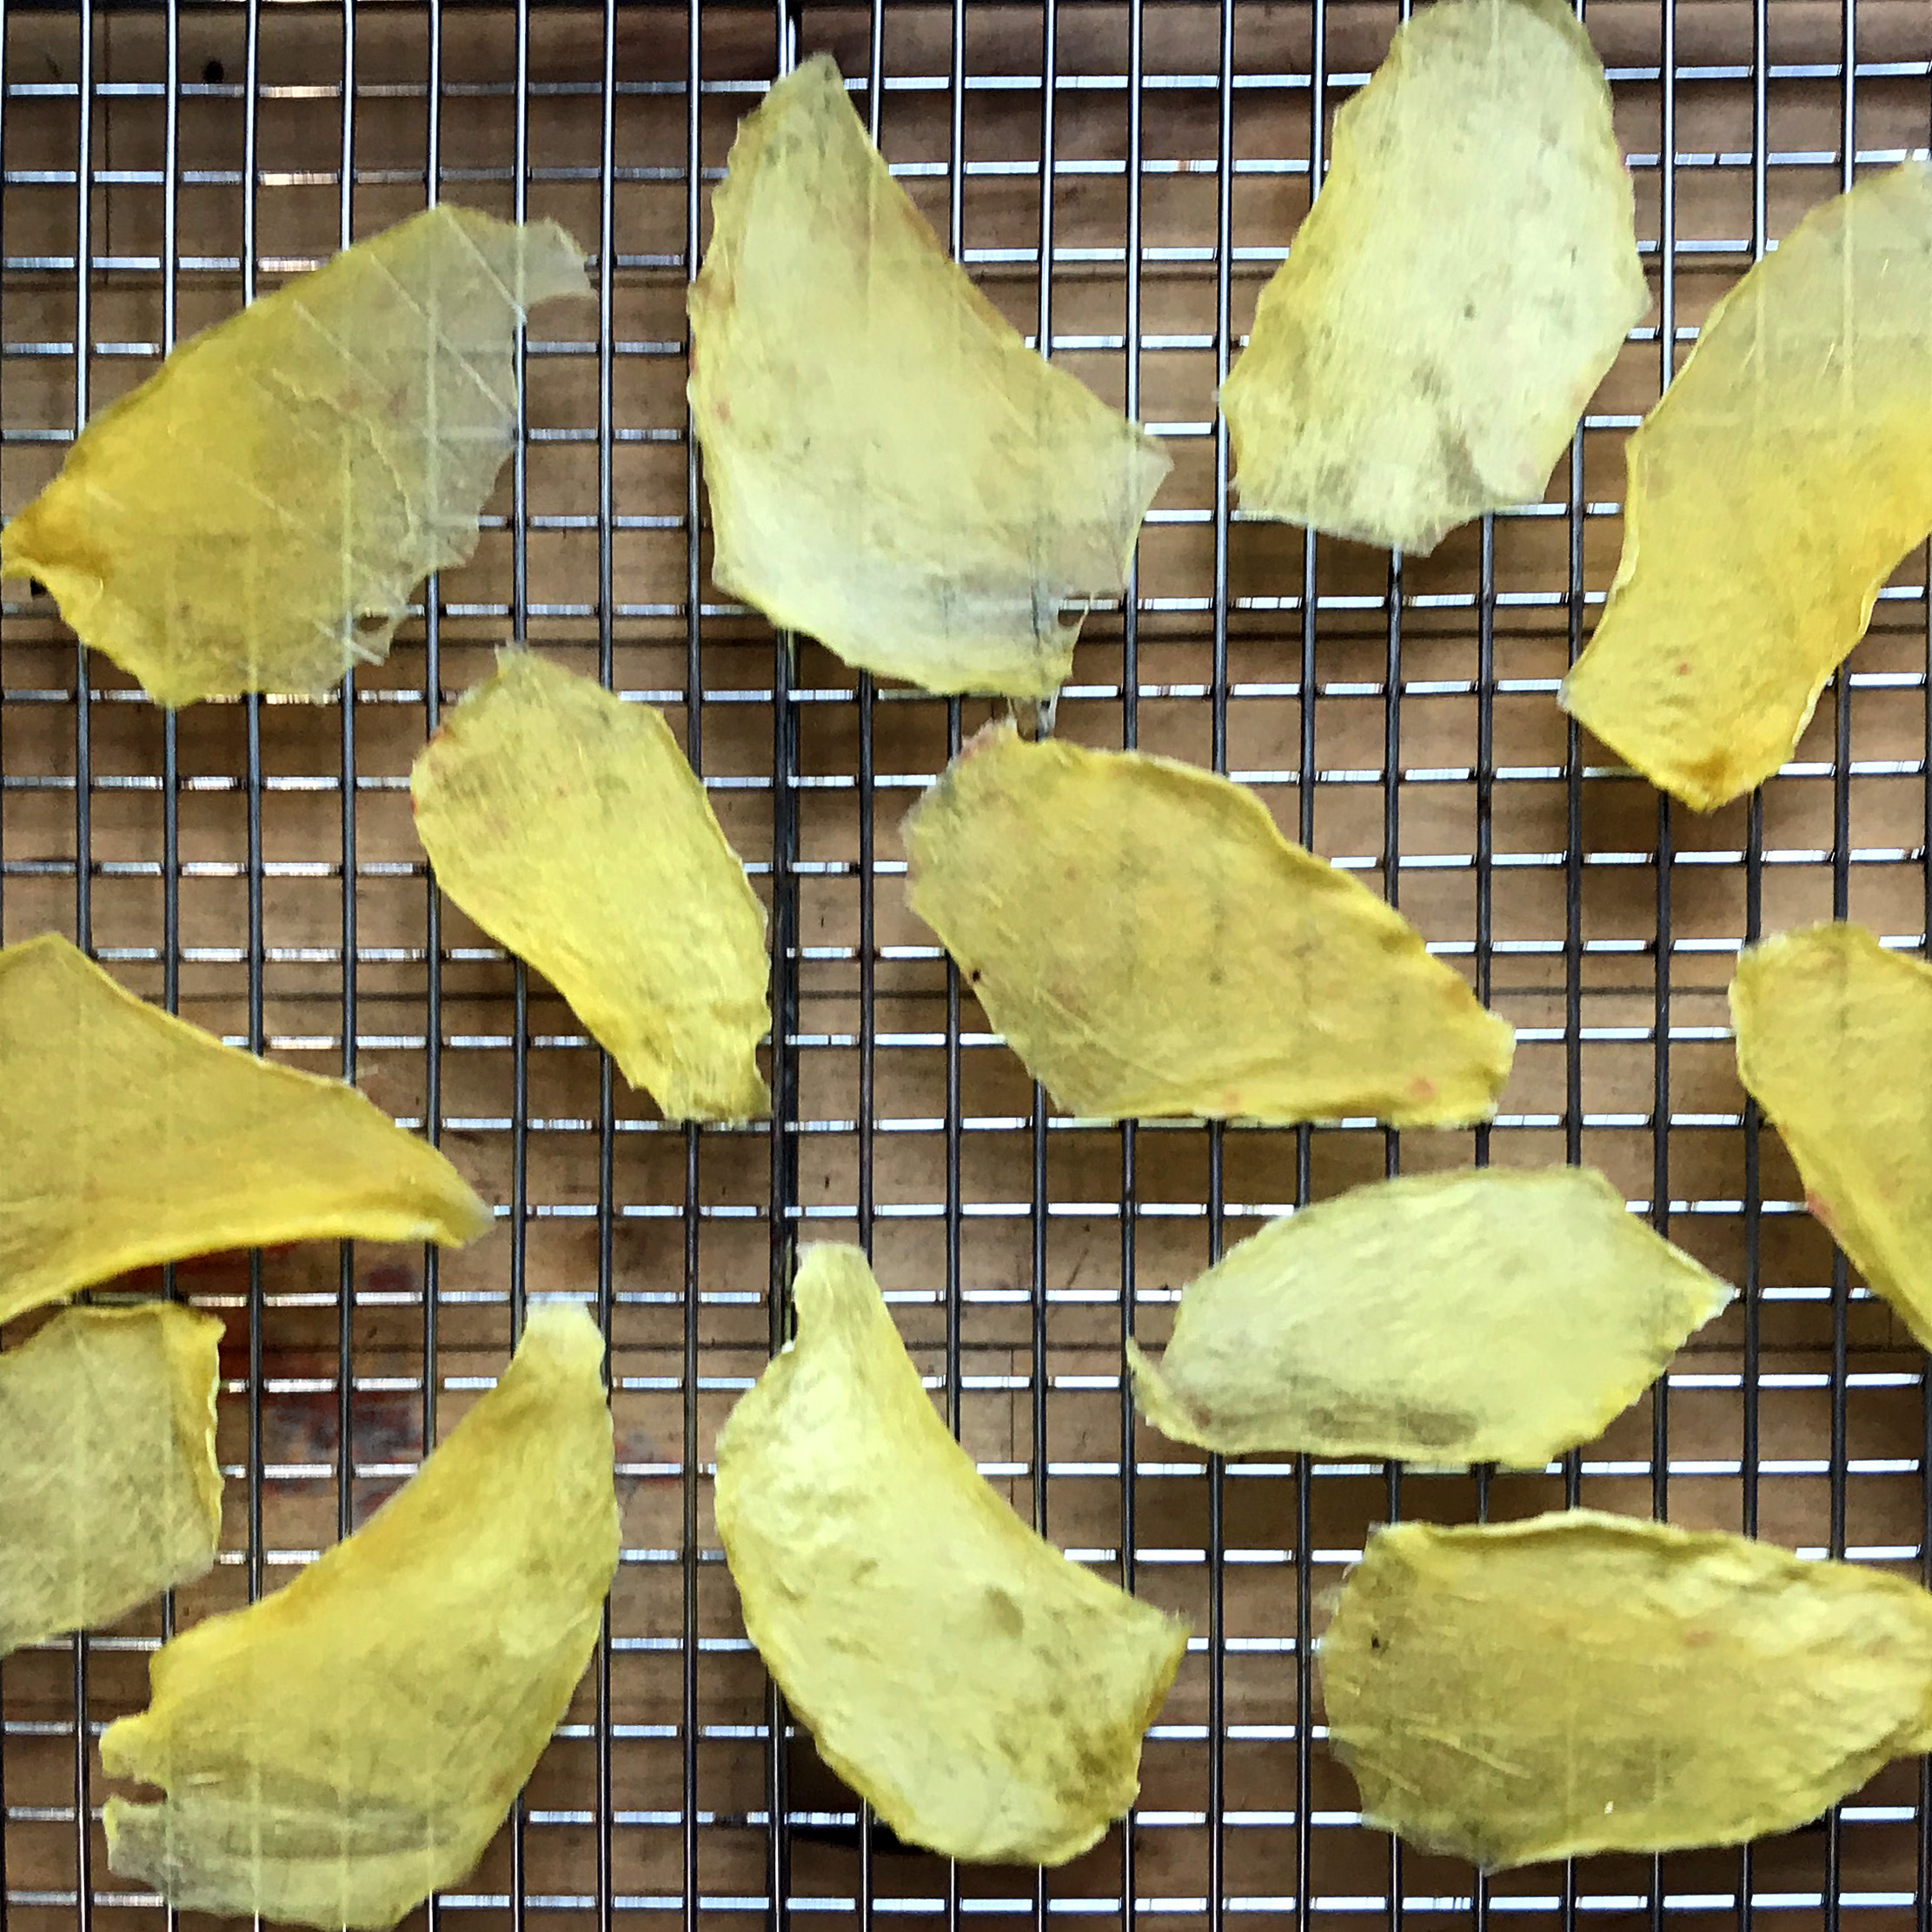 paper thin dehydrated mango slices